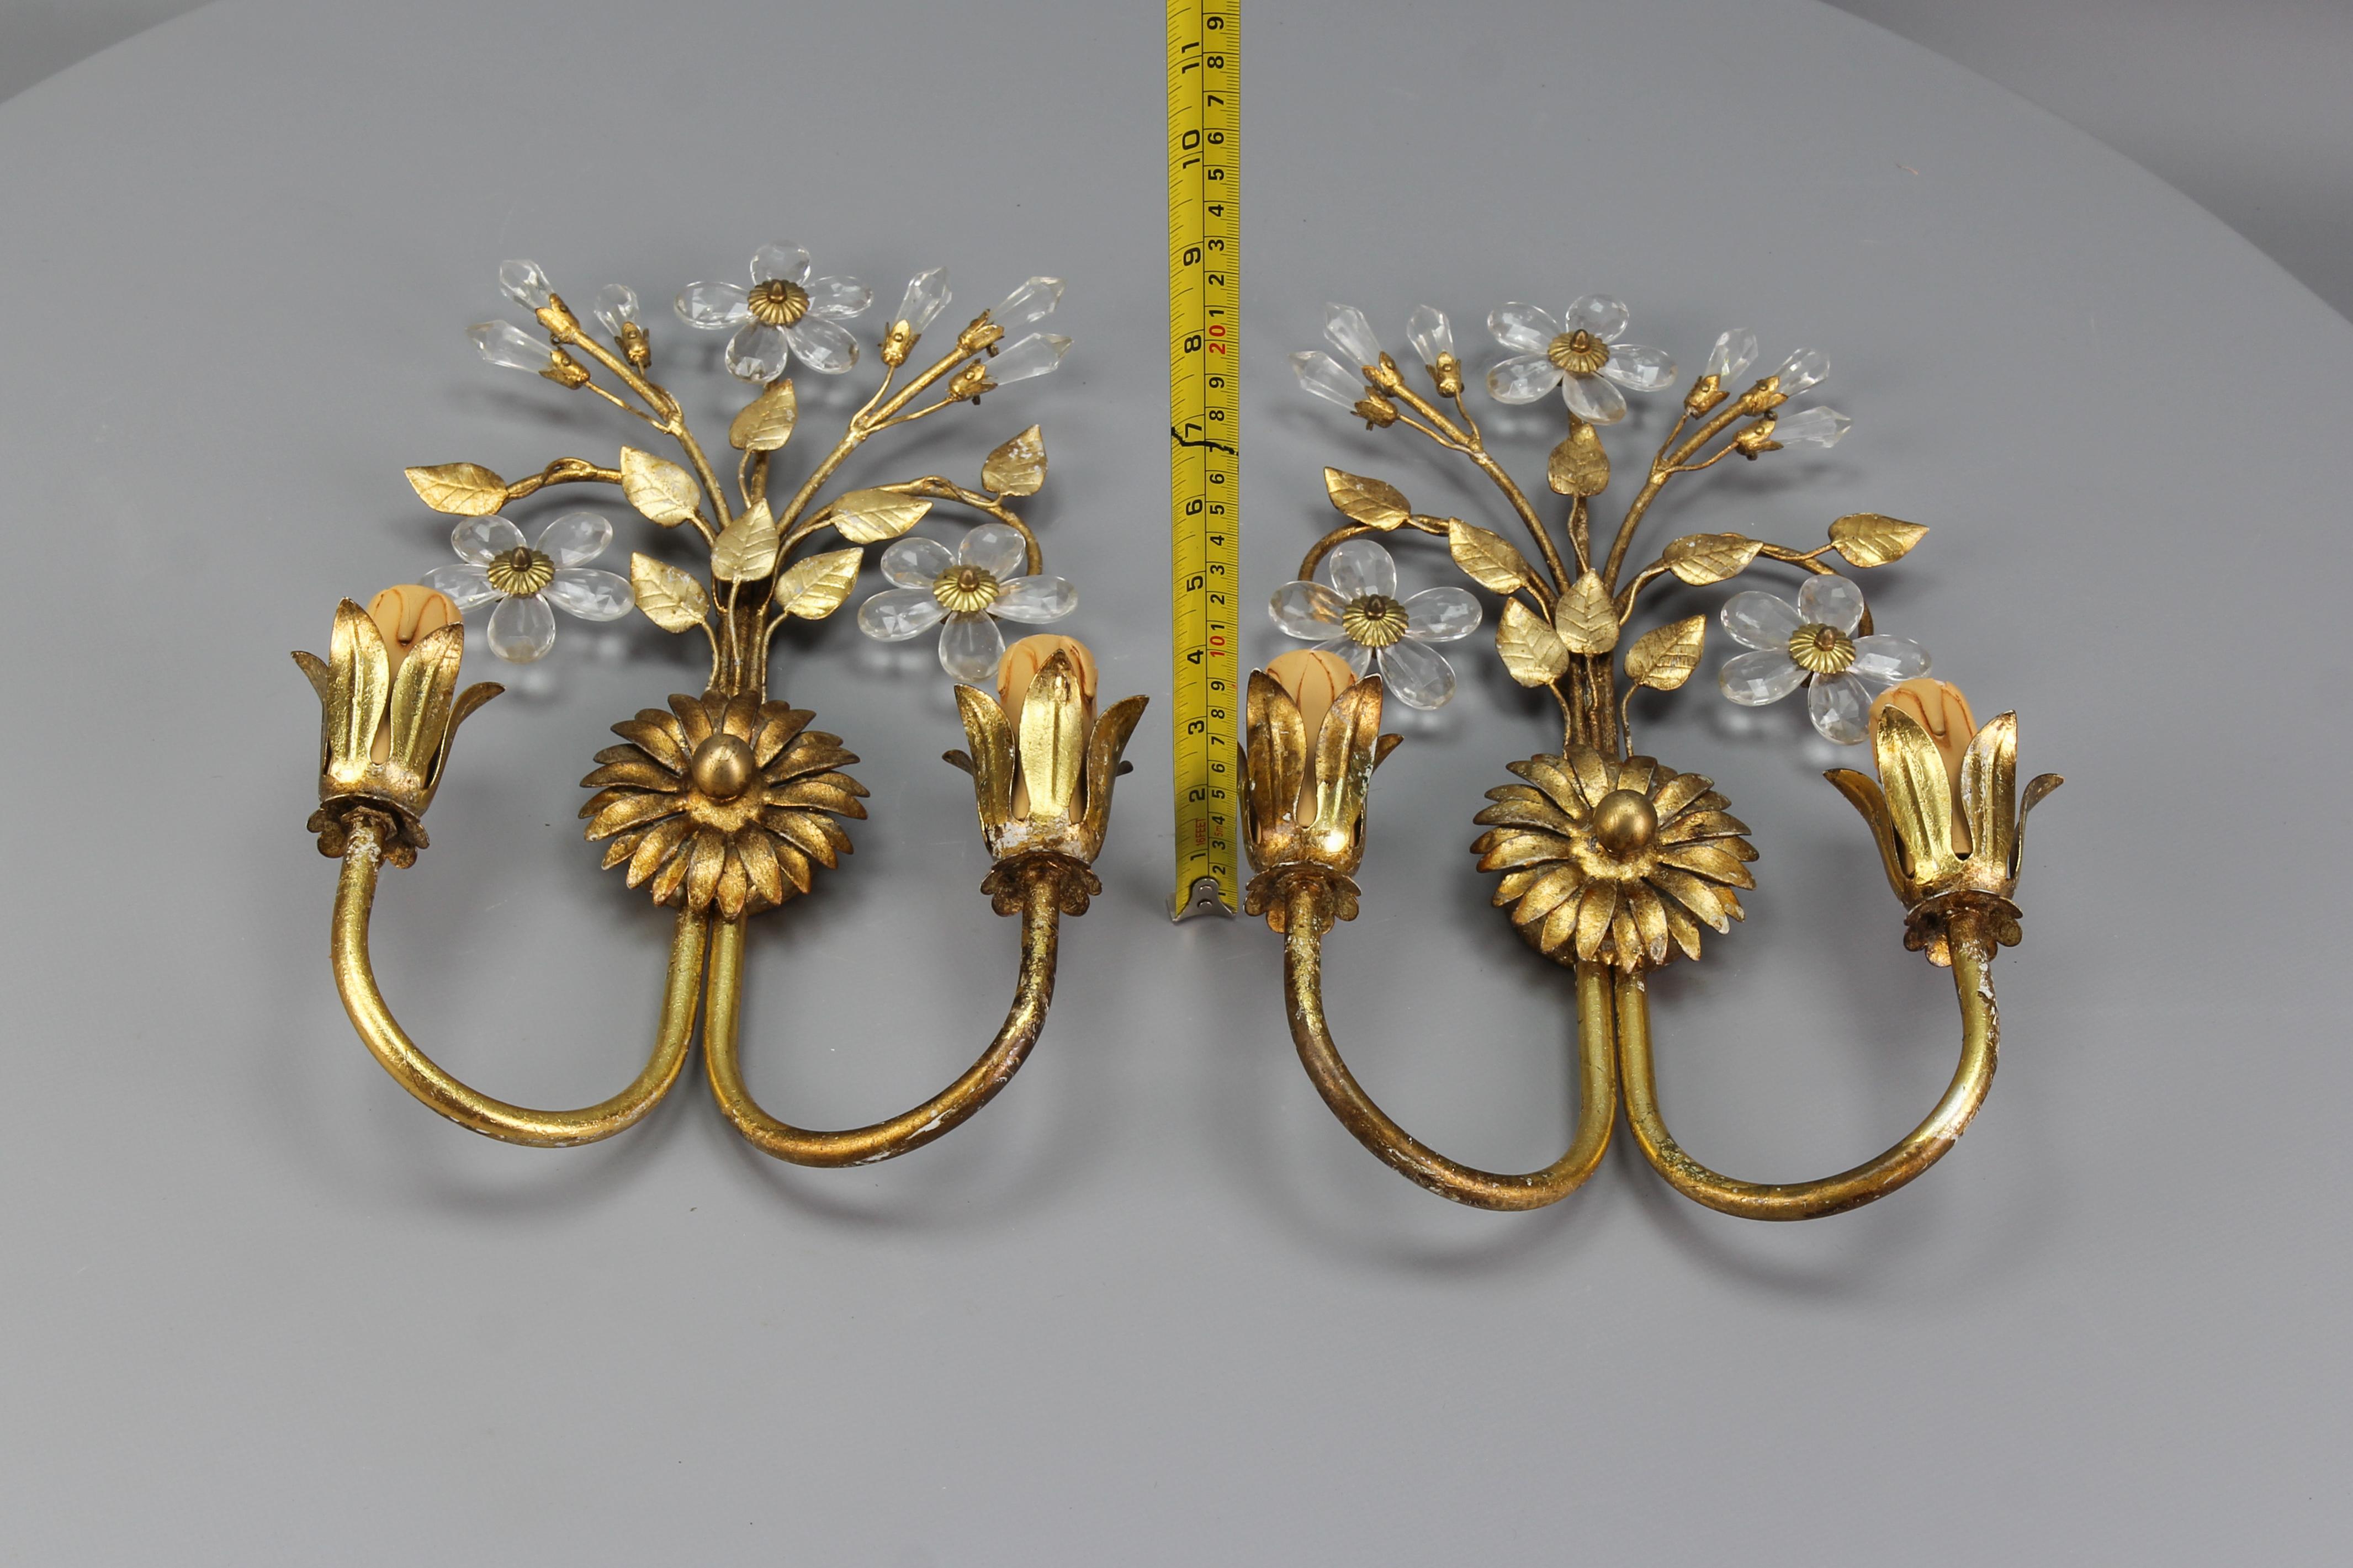 Pair of Hollywood Regency Style Italian Gilt Metal and Glass Flower Sconces 15